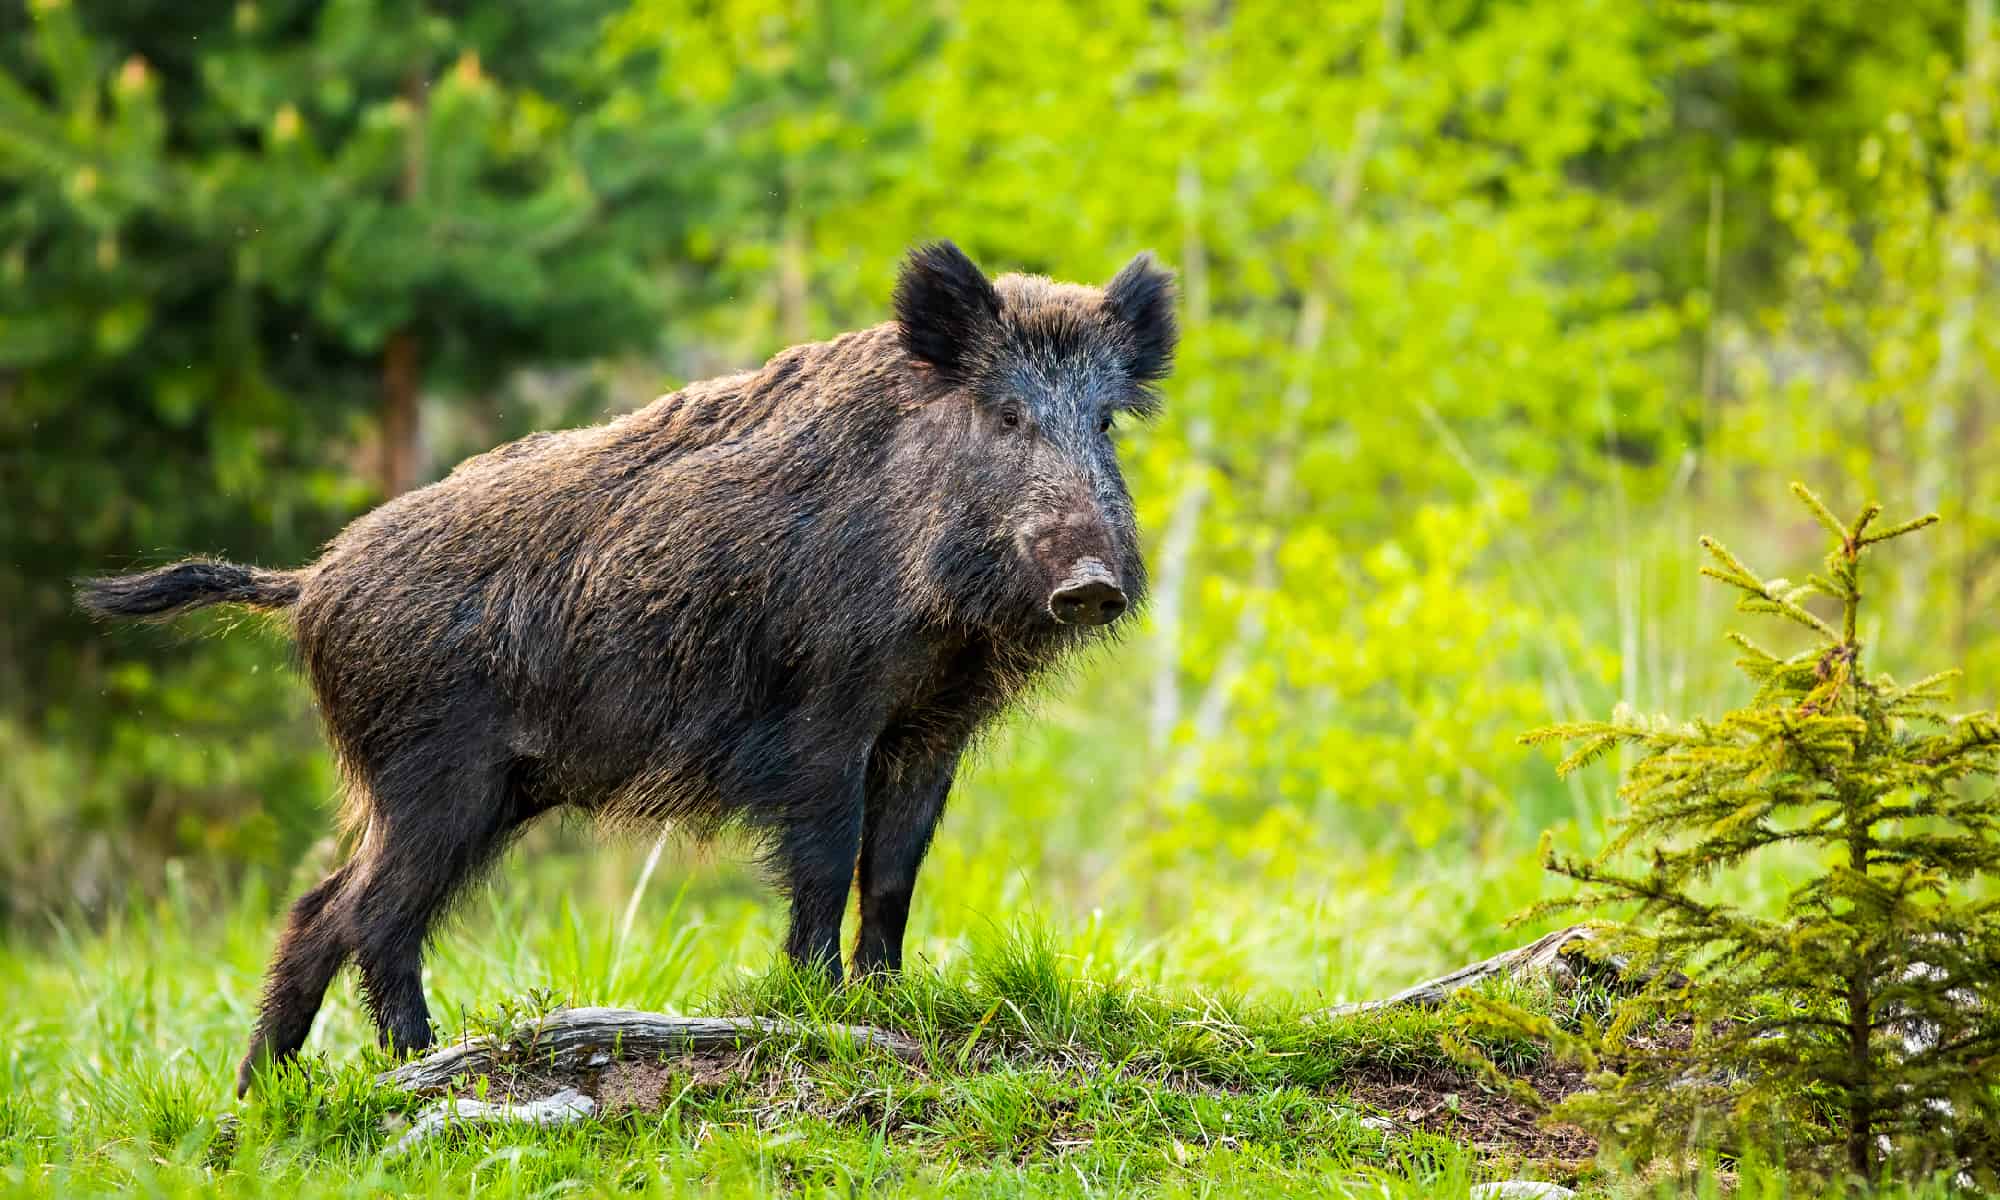 Discover The Largest Wild Hog Ever Caught In Louisiana - AZ Animals